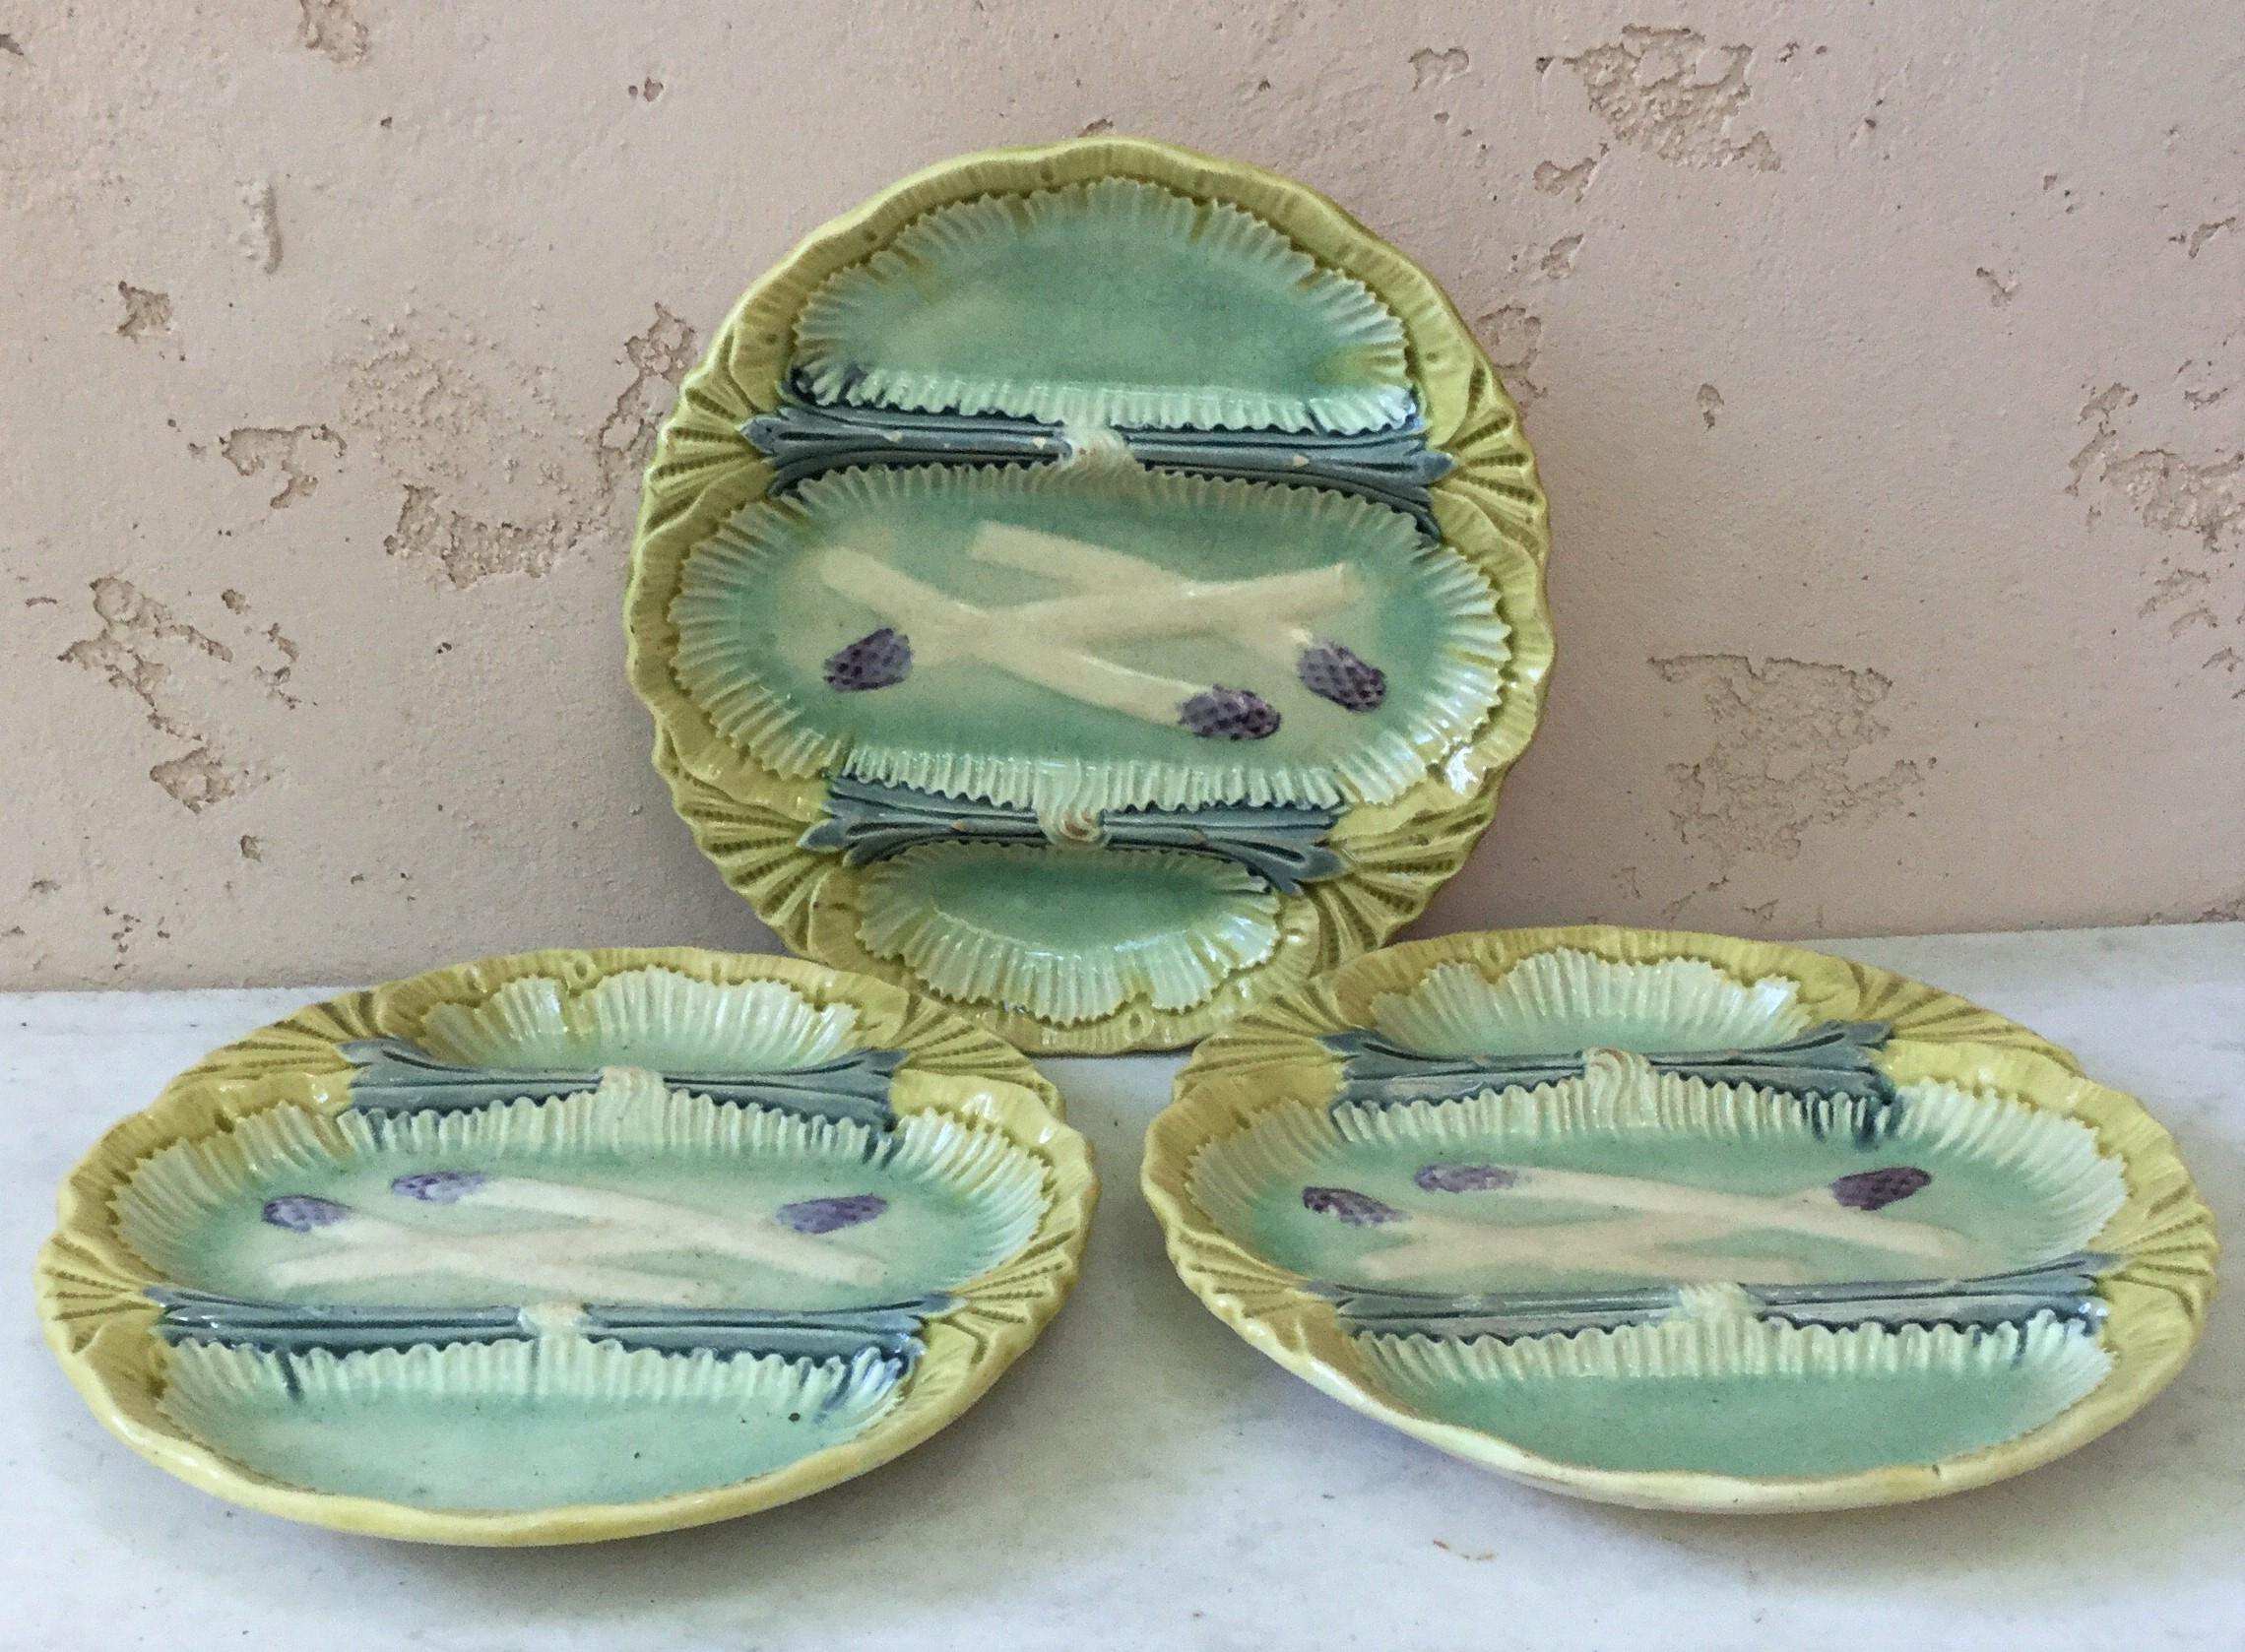 Unusual French Majolica asparagus plate with 3 spaces unsigned, circa 1890.